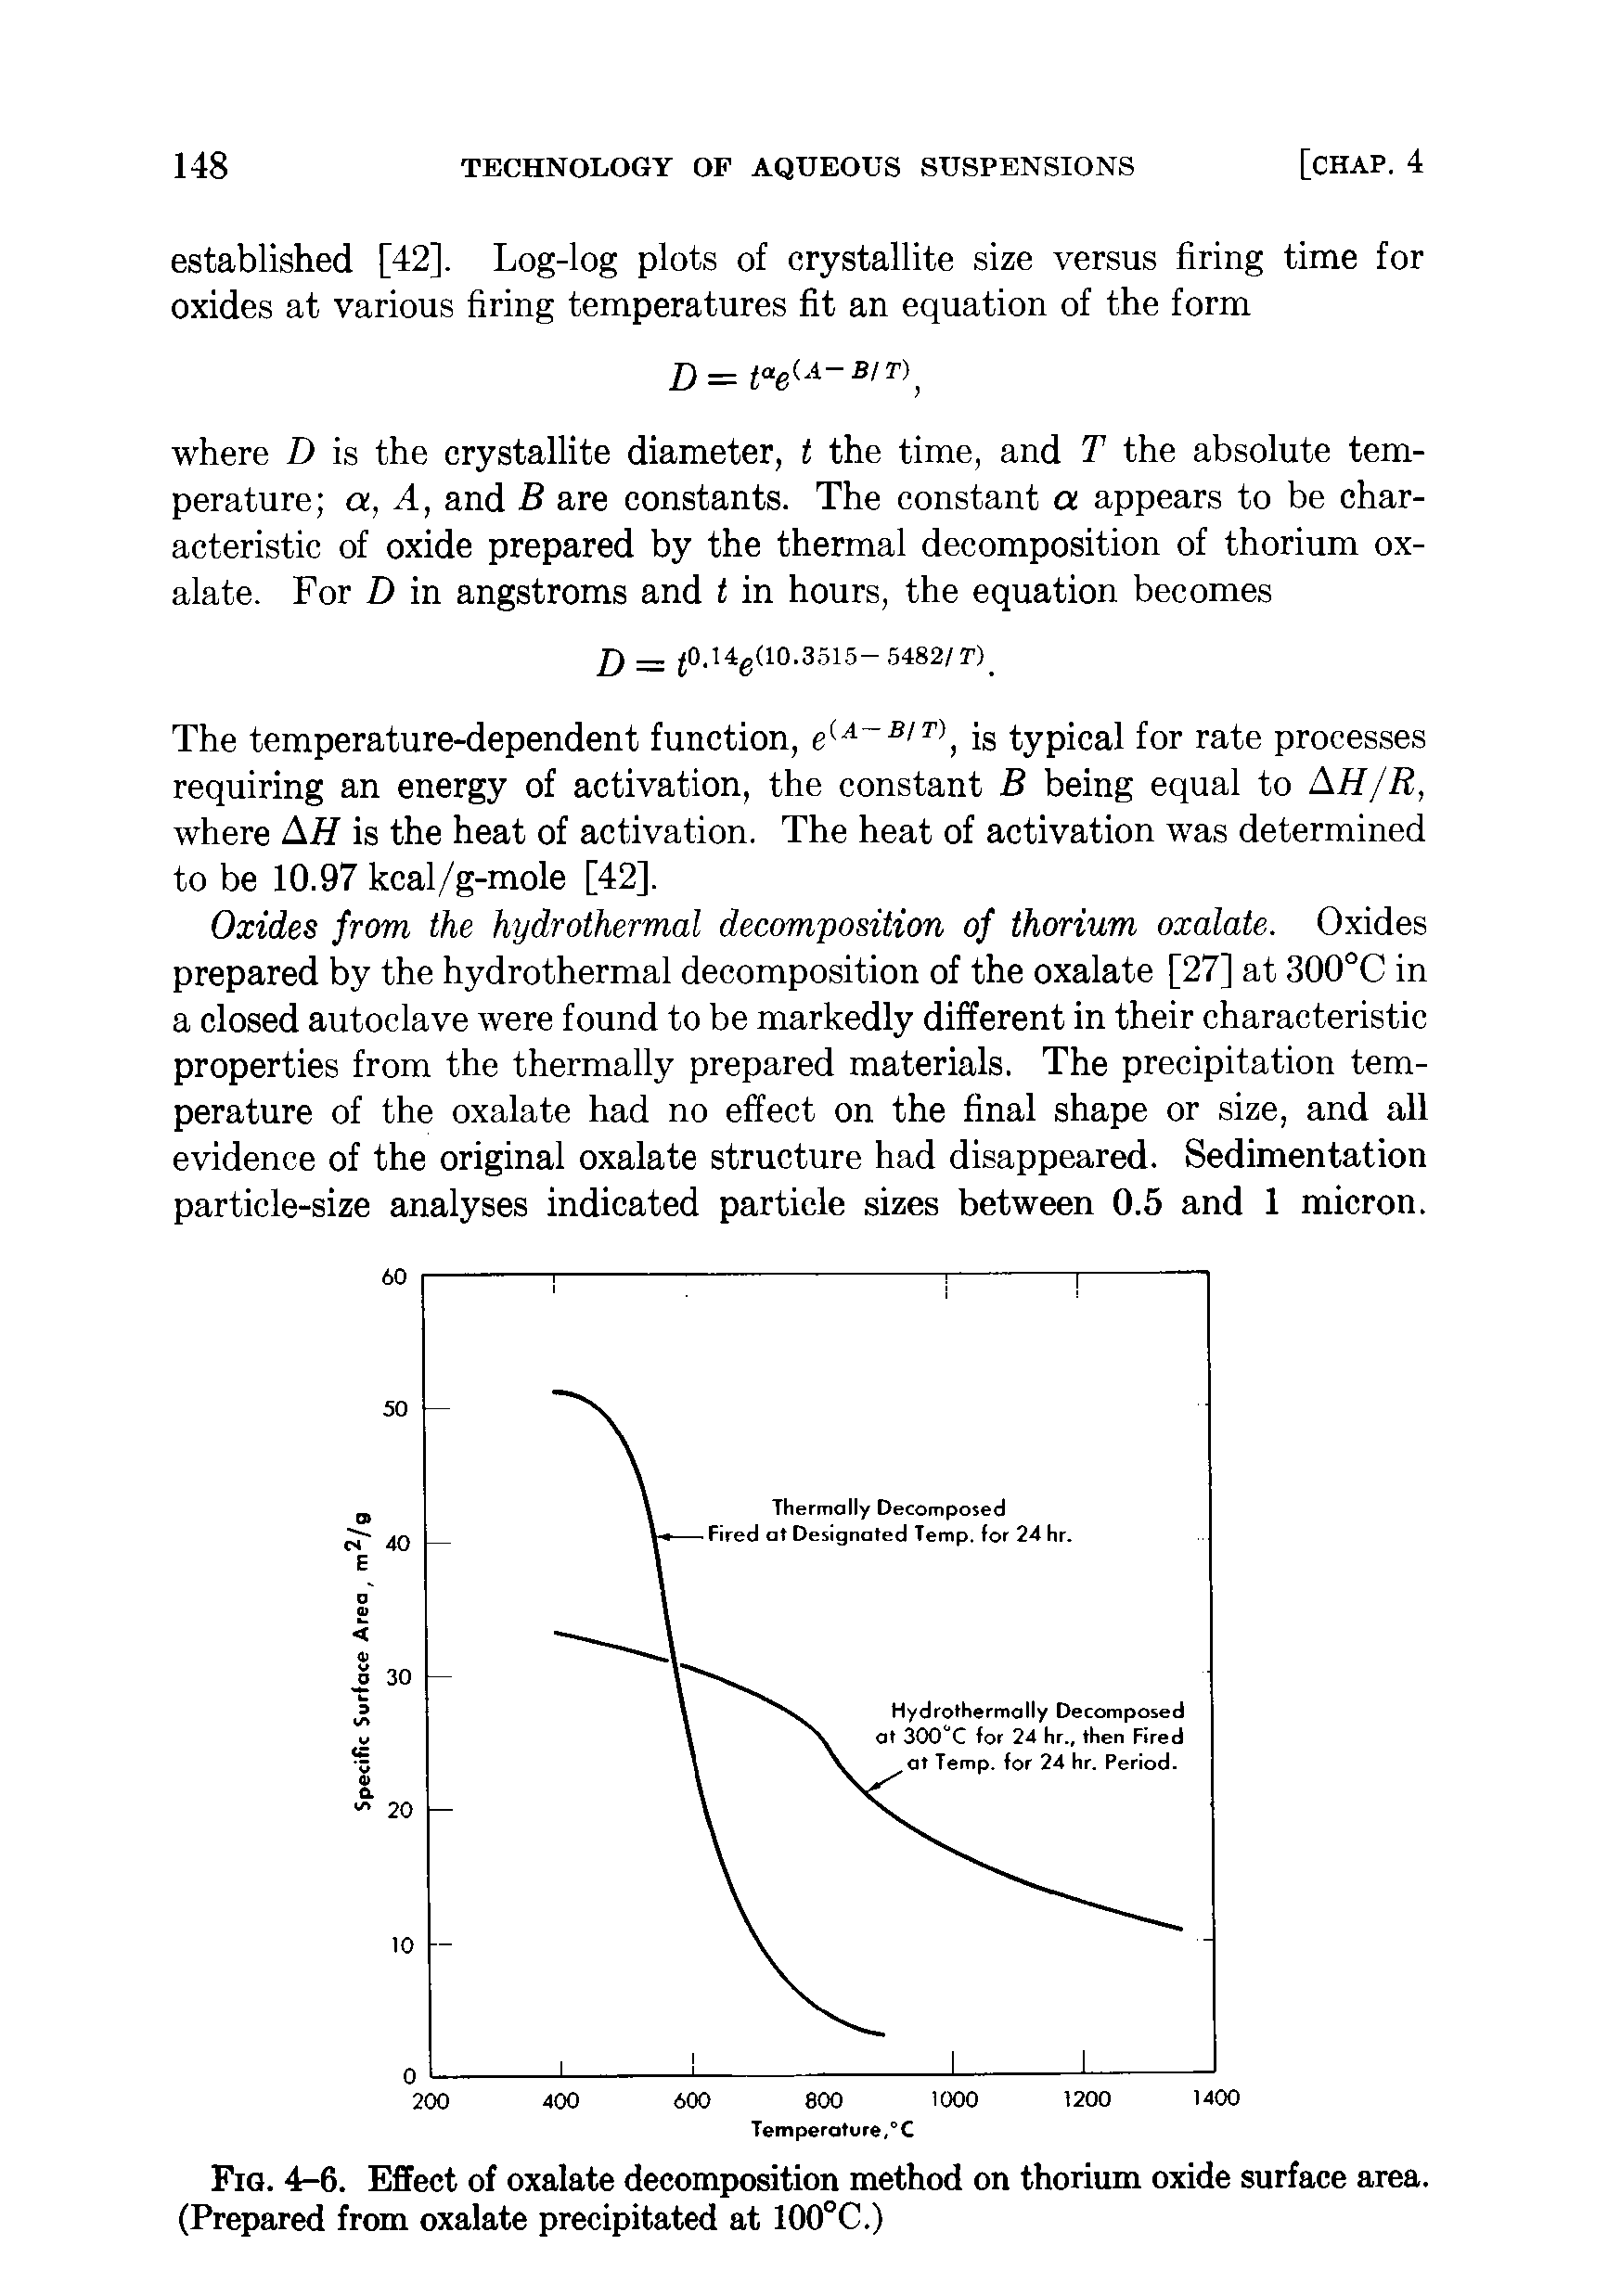 Fig. 4-6. Effect of oxalate decomposition method on thorium oxide surface area. (Prepared from oxalate precipitated at 100°C.)...